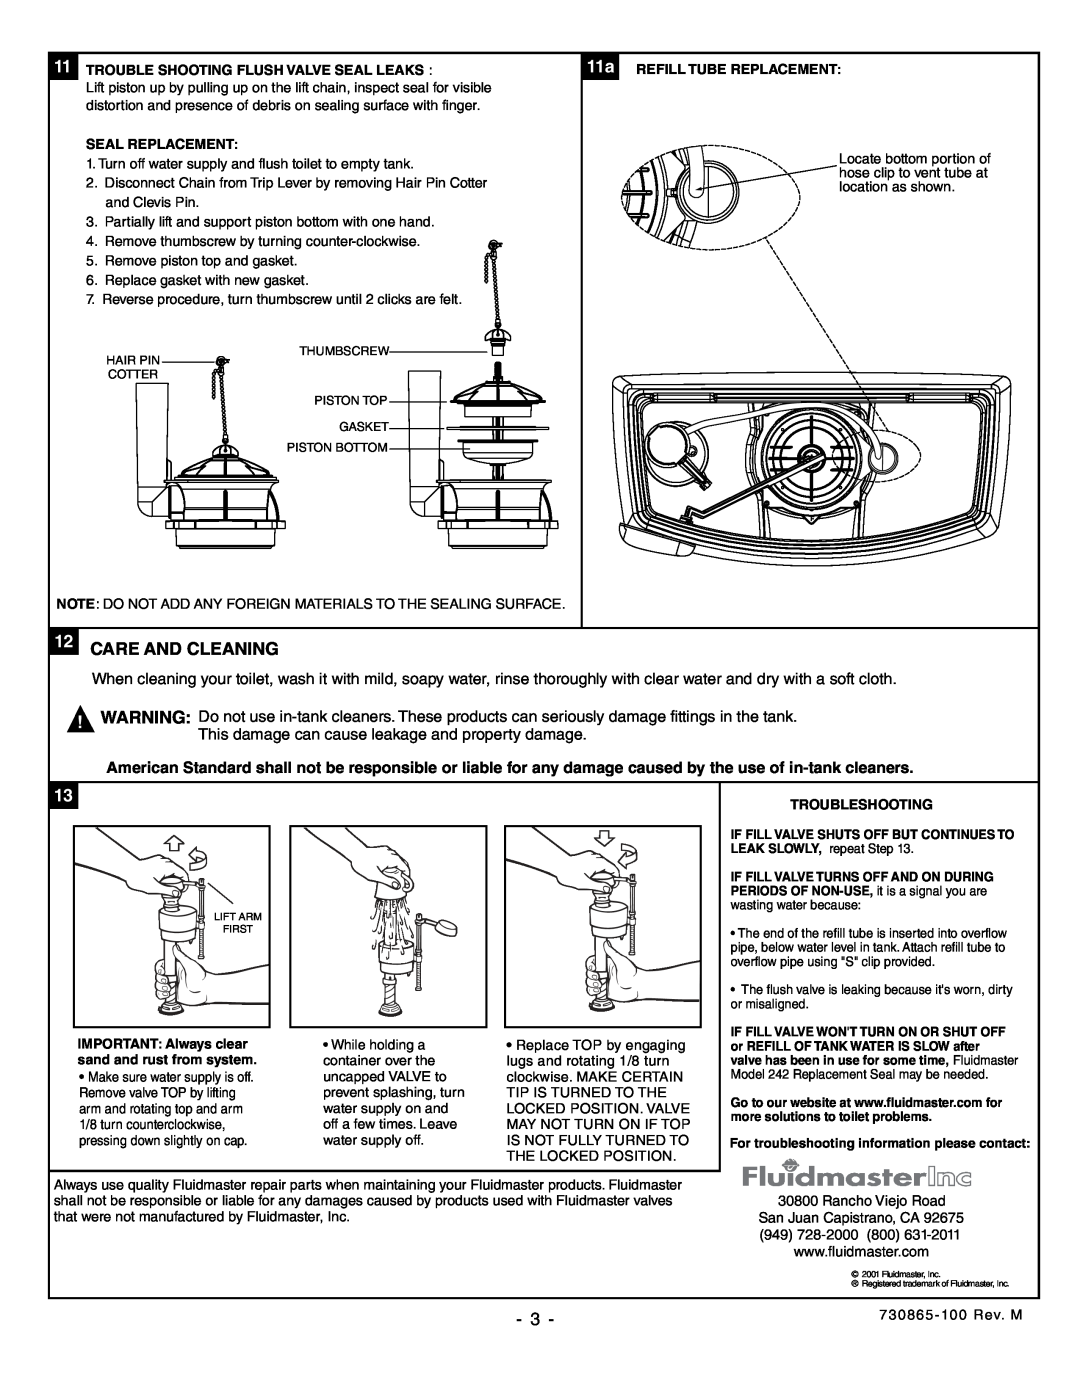 American Standard 2004, 2034 Care And Cleaning, Trouble Shooting Flush Valve Seal Leaks, Seal Replacement, Troubleshooting 